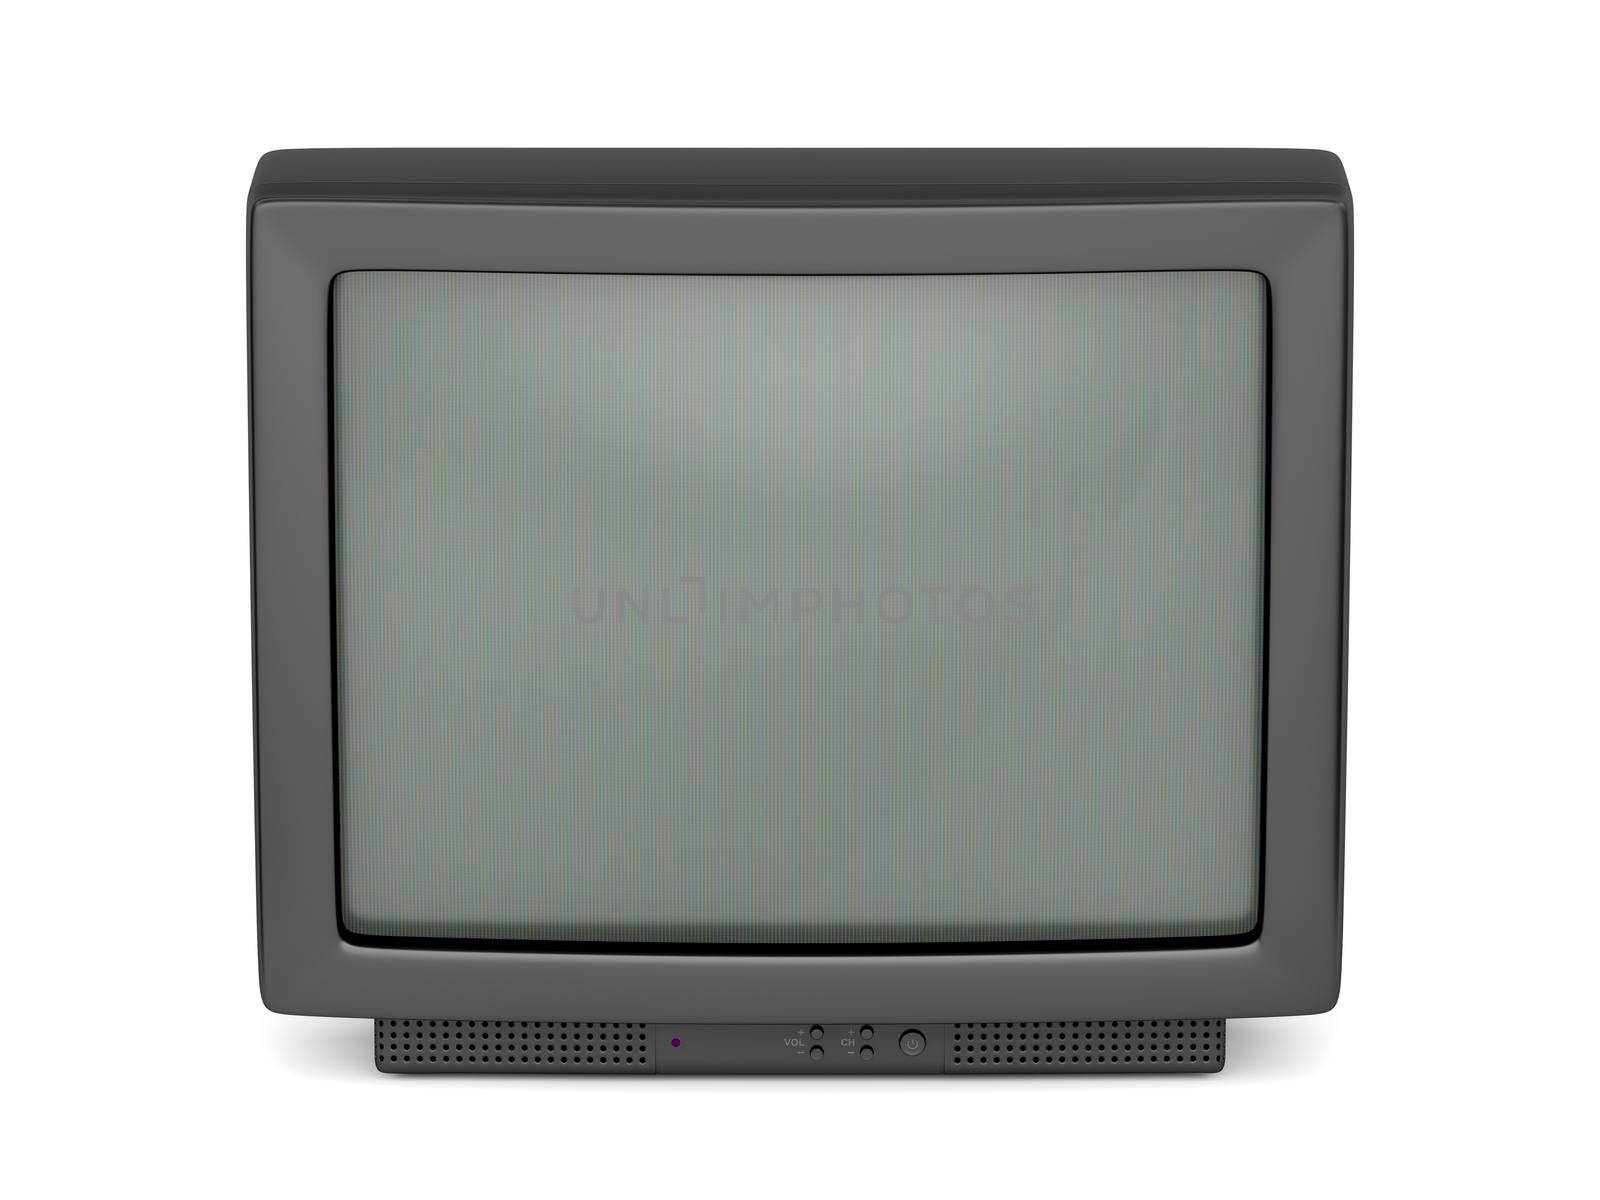 Old TV on white background, front view